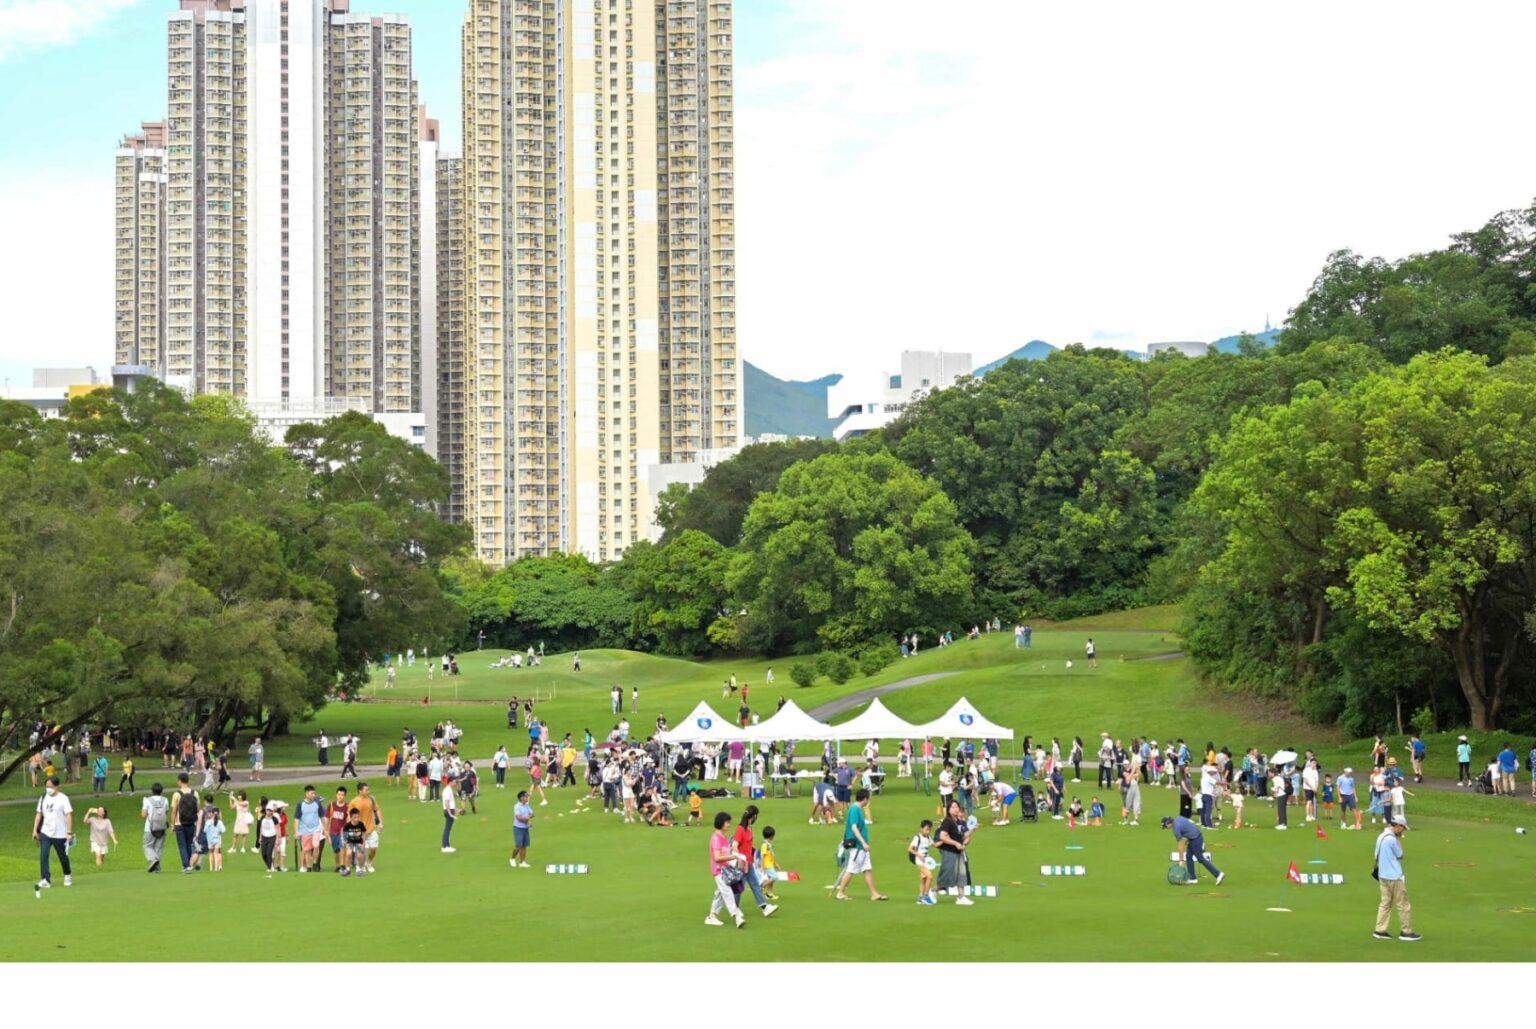 A view of the Hong Kong Golf Course at Fanling. People are walking on the lawns, which also has tents. There is a block of high-rise apartments overlooking the golf course.